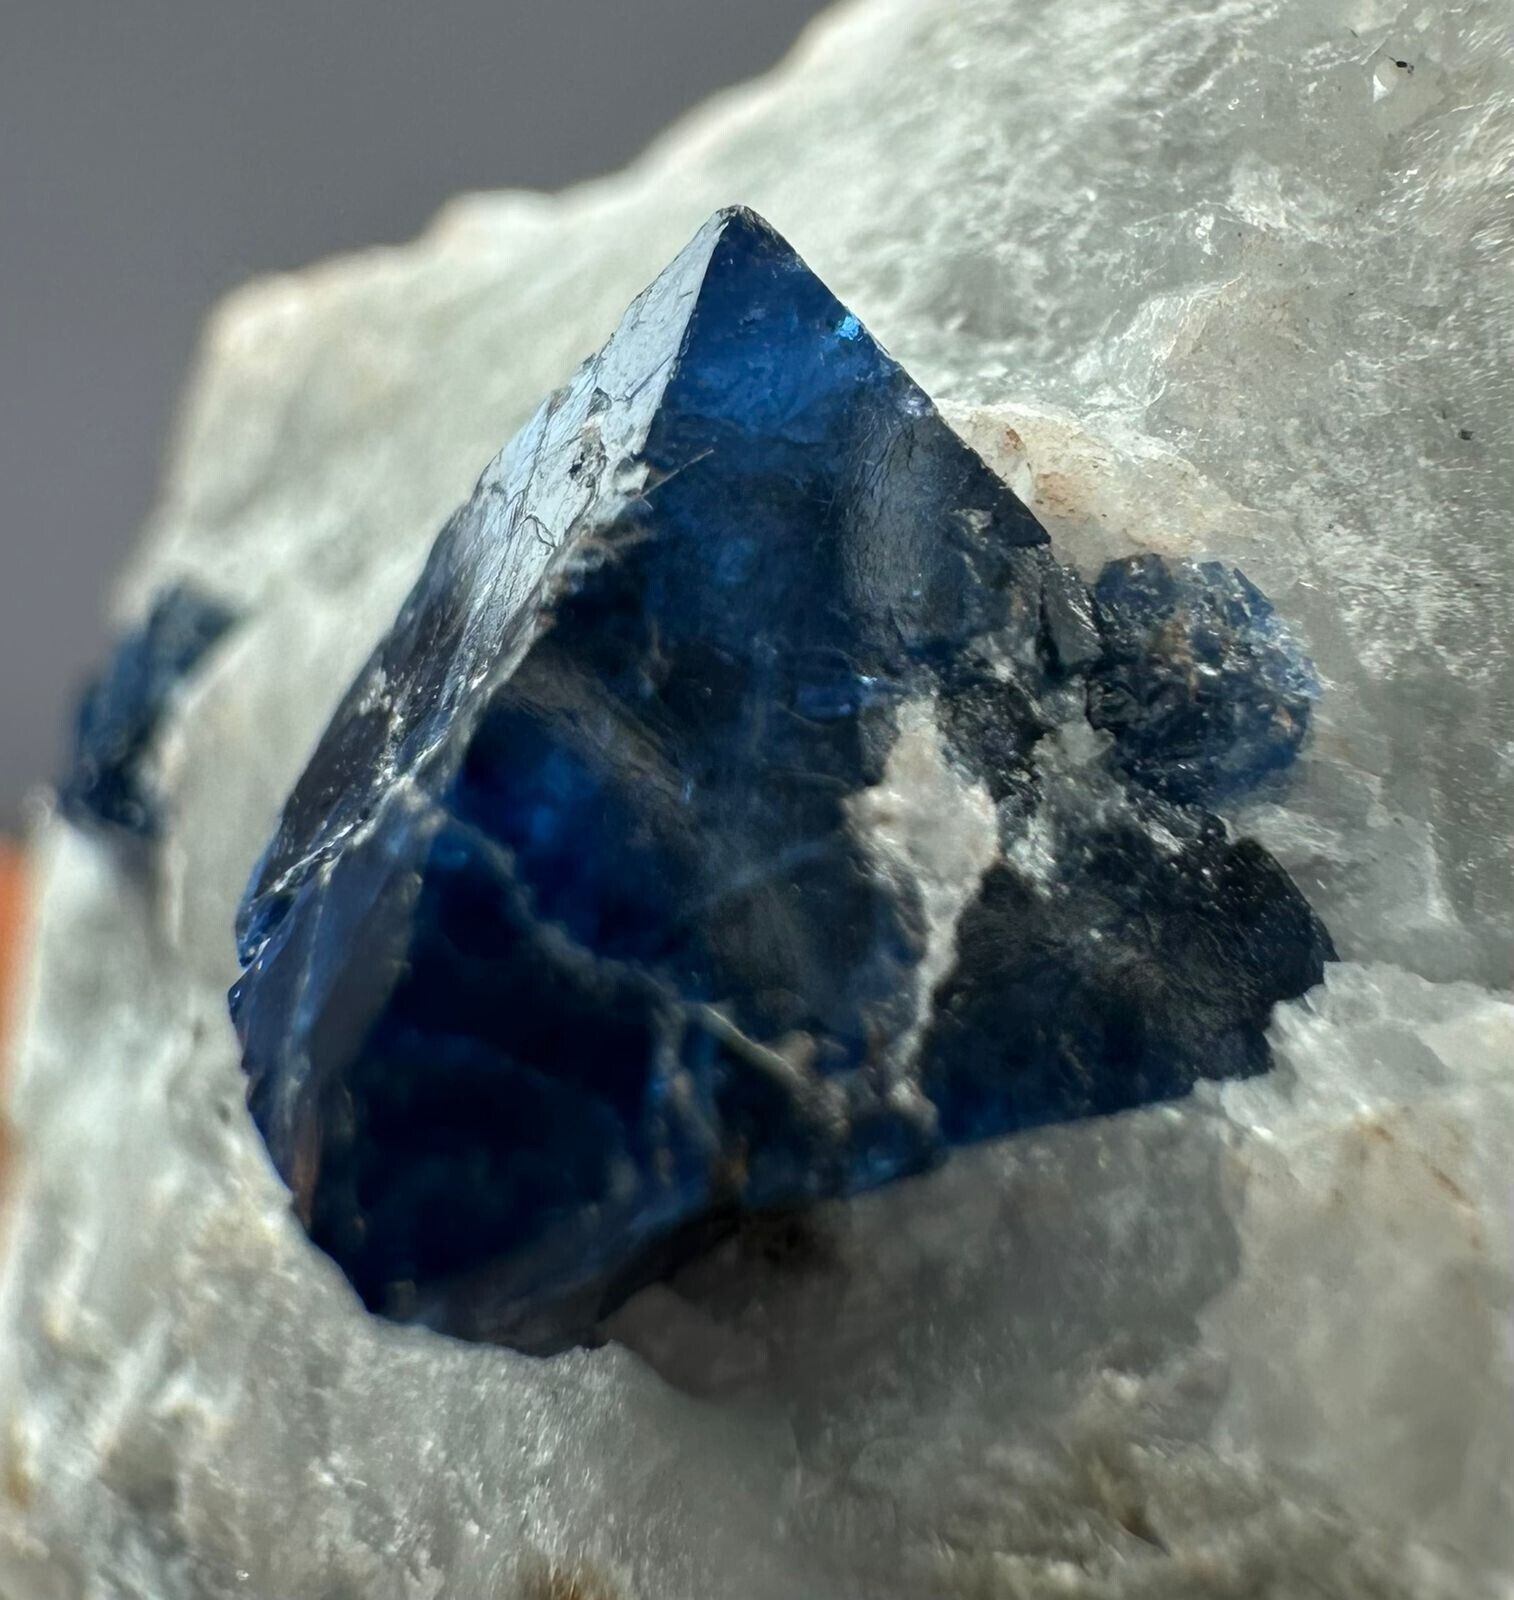 181 Ct Extremely Rare Top Blue Spinel Crystals On Matrix From Skardu Pakistan